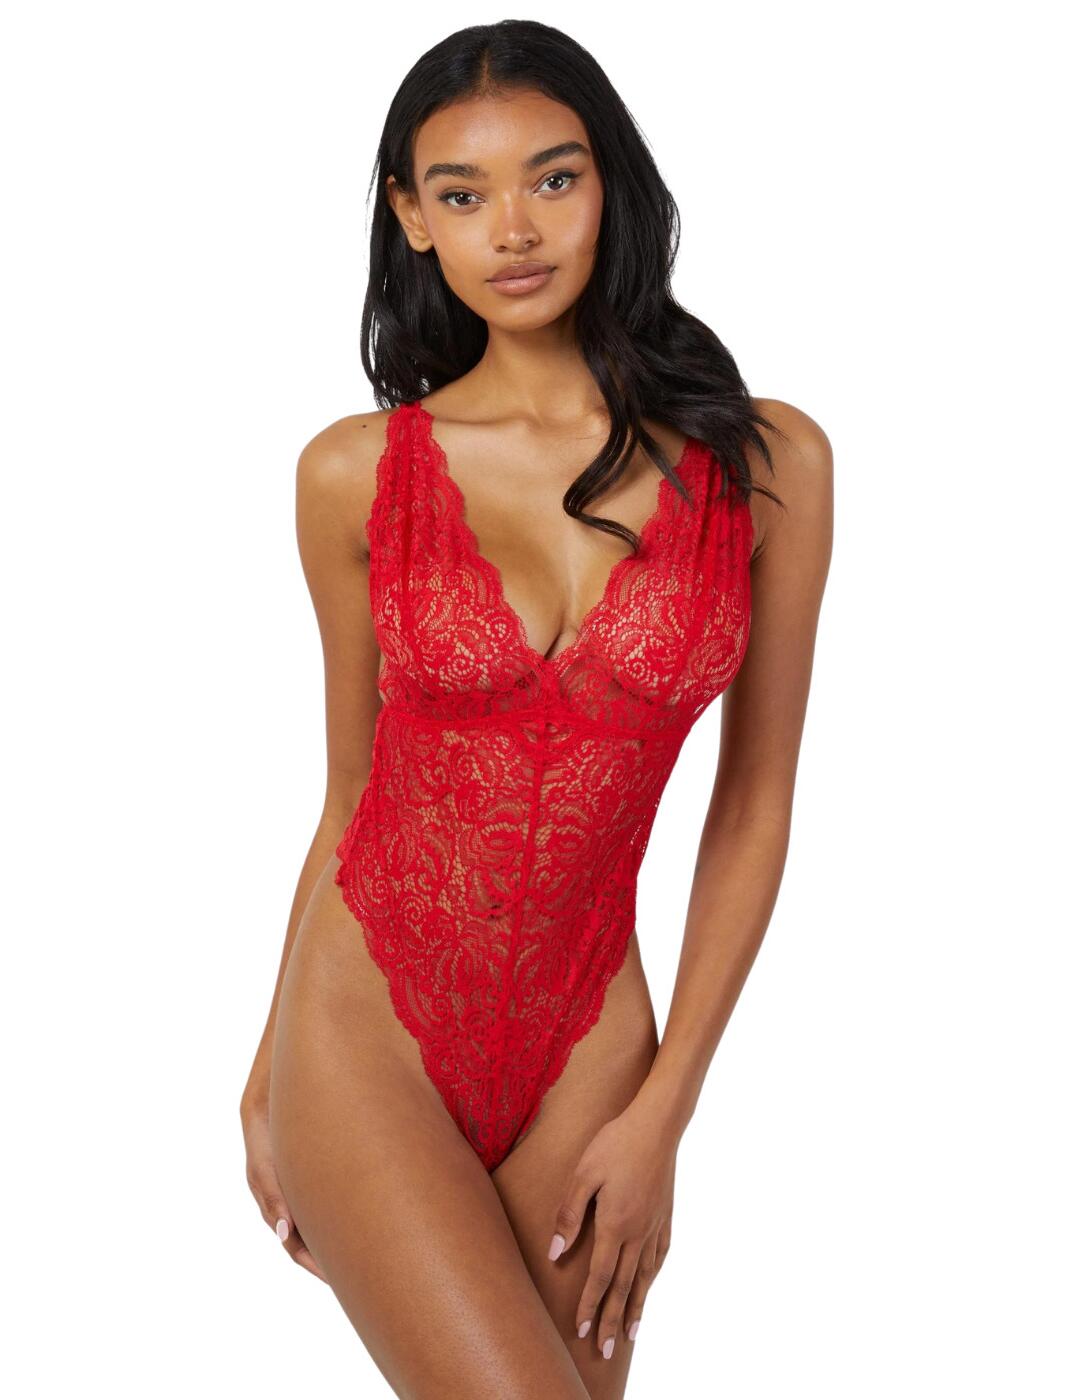 Wolf & Whistle Ariana Bodysuit Red